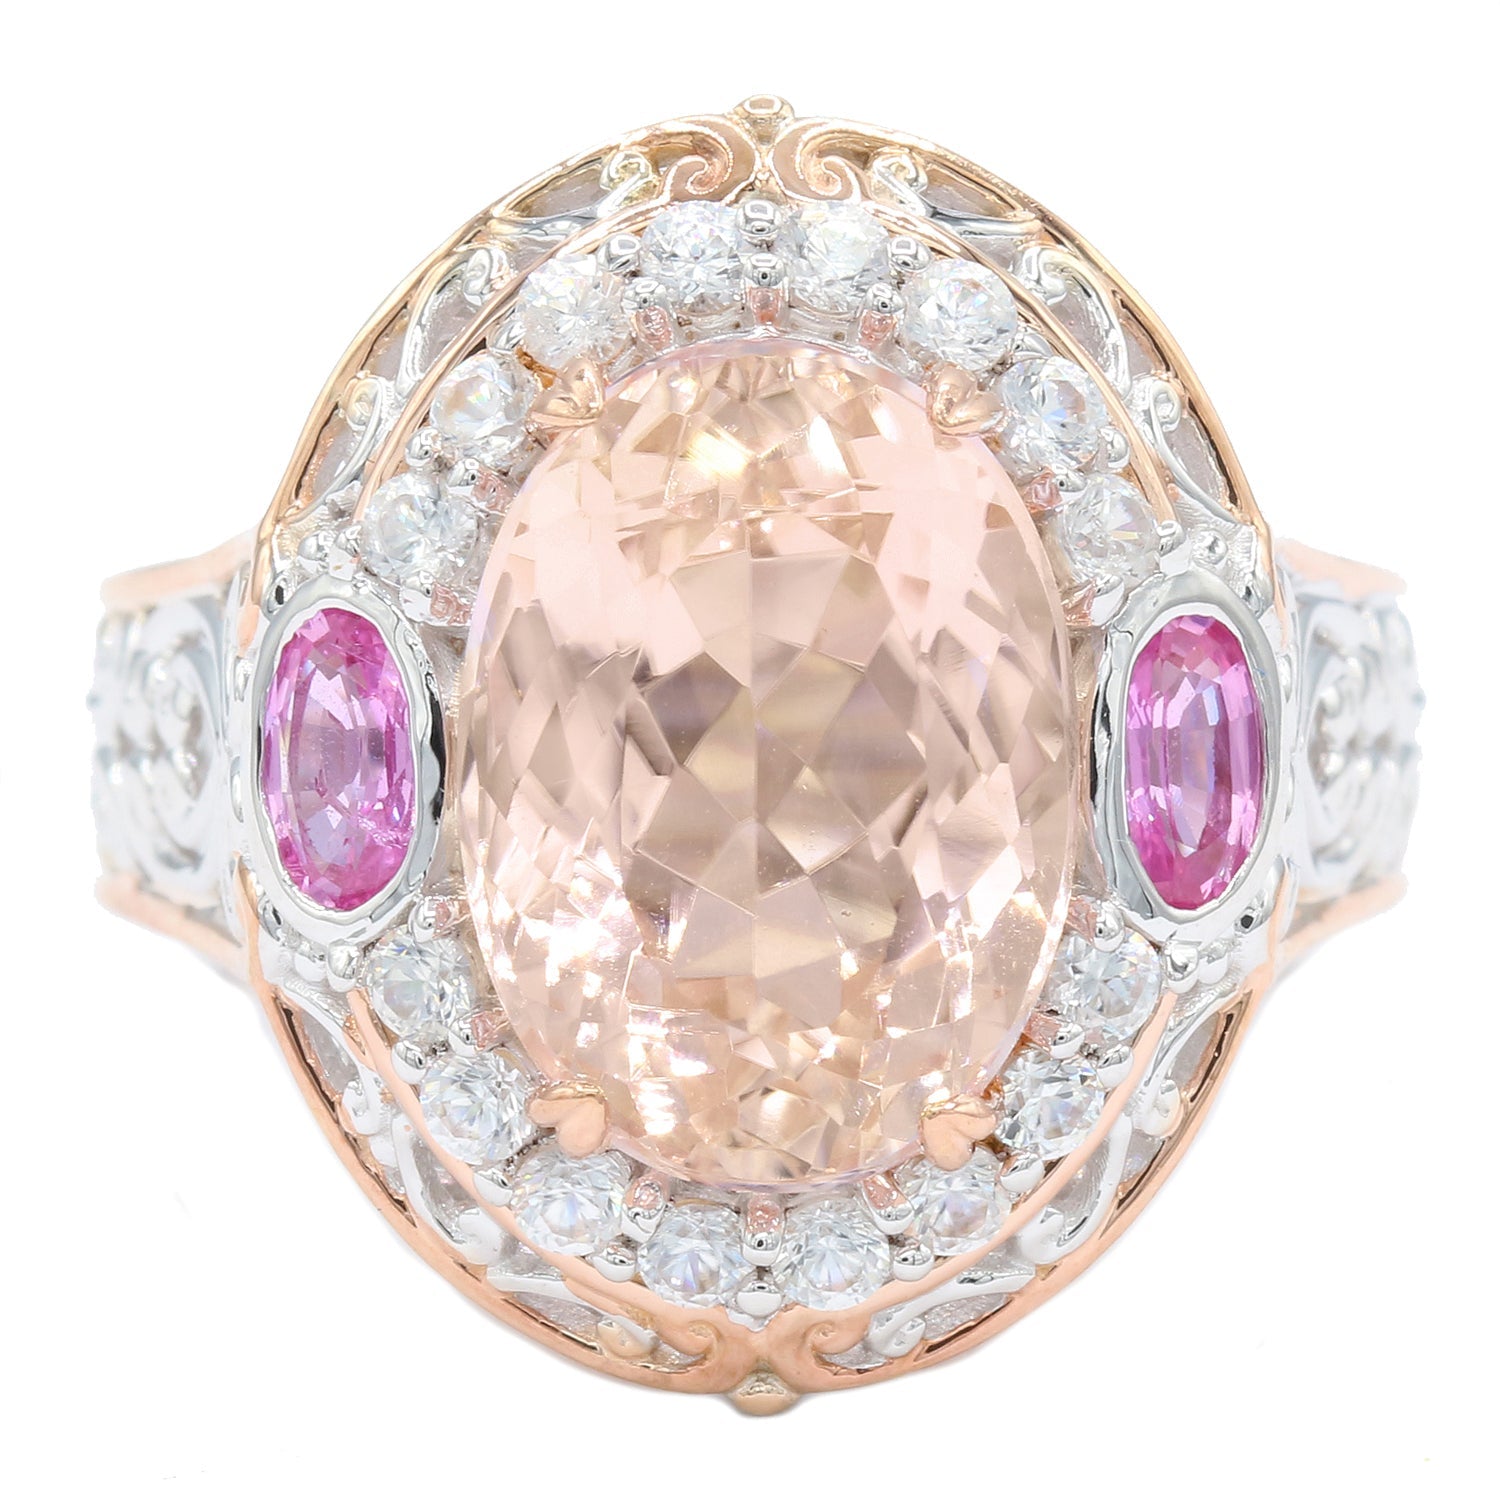 1.39 ctw Pink Sapphire and Diamond Pendant in 14k white gold